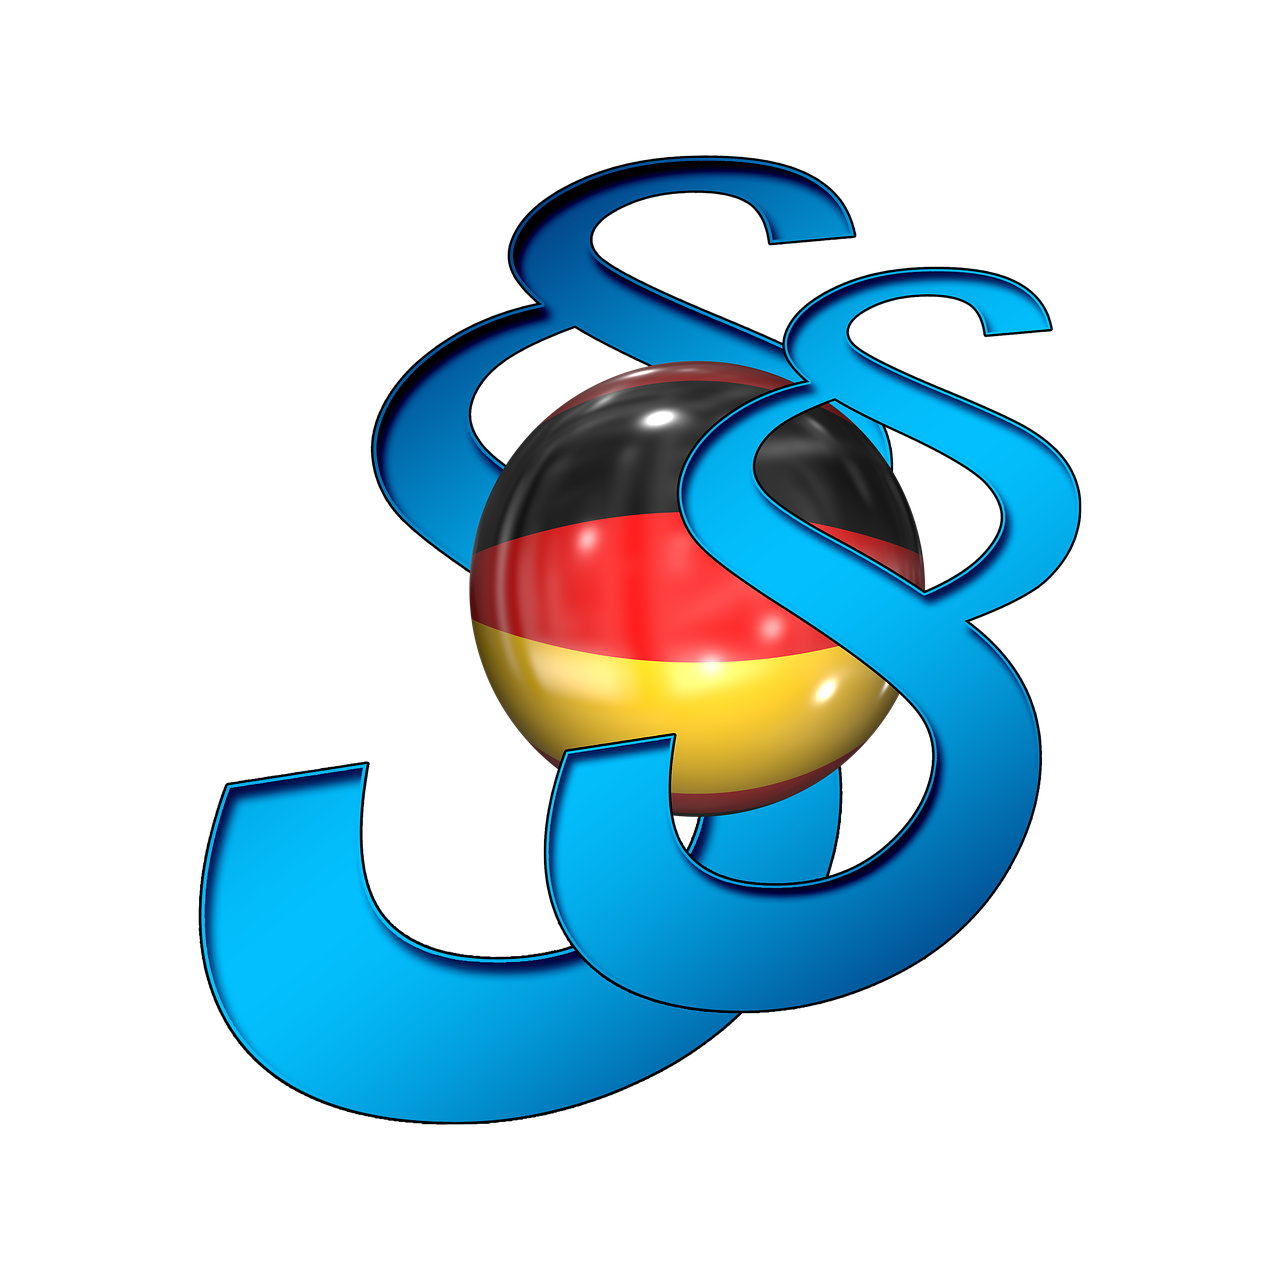 clause germany flag free photo